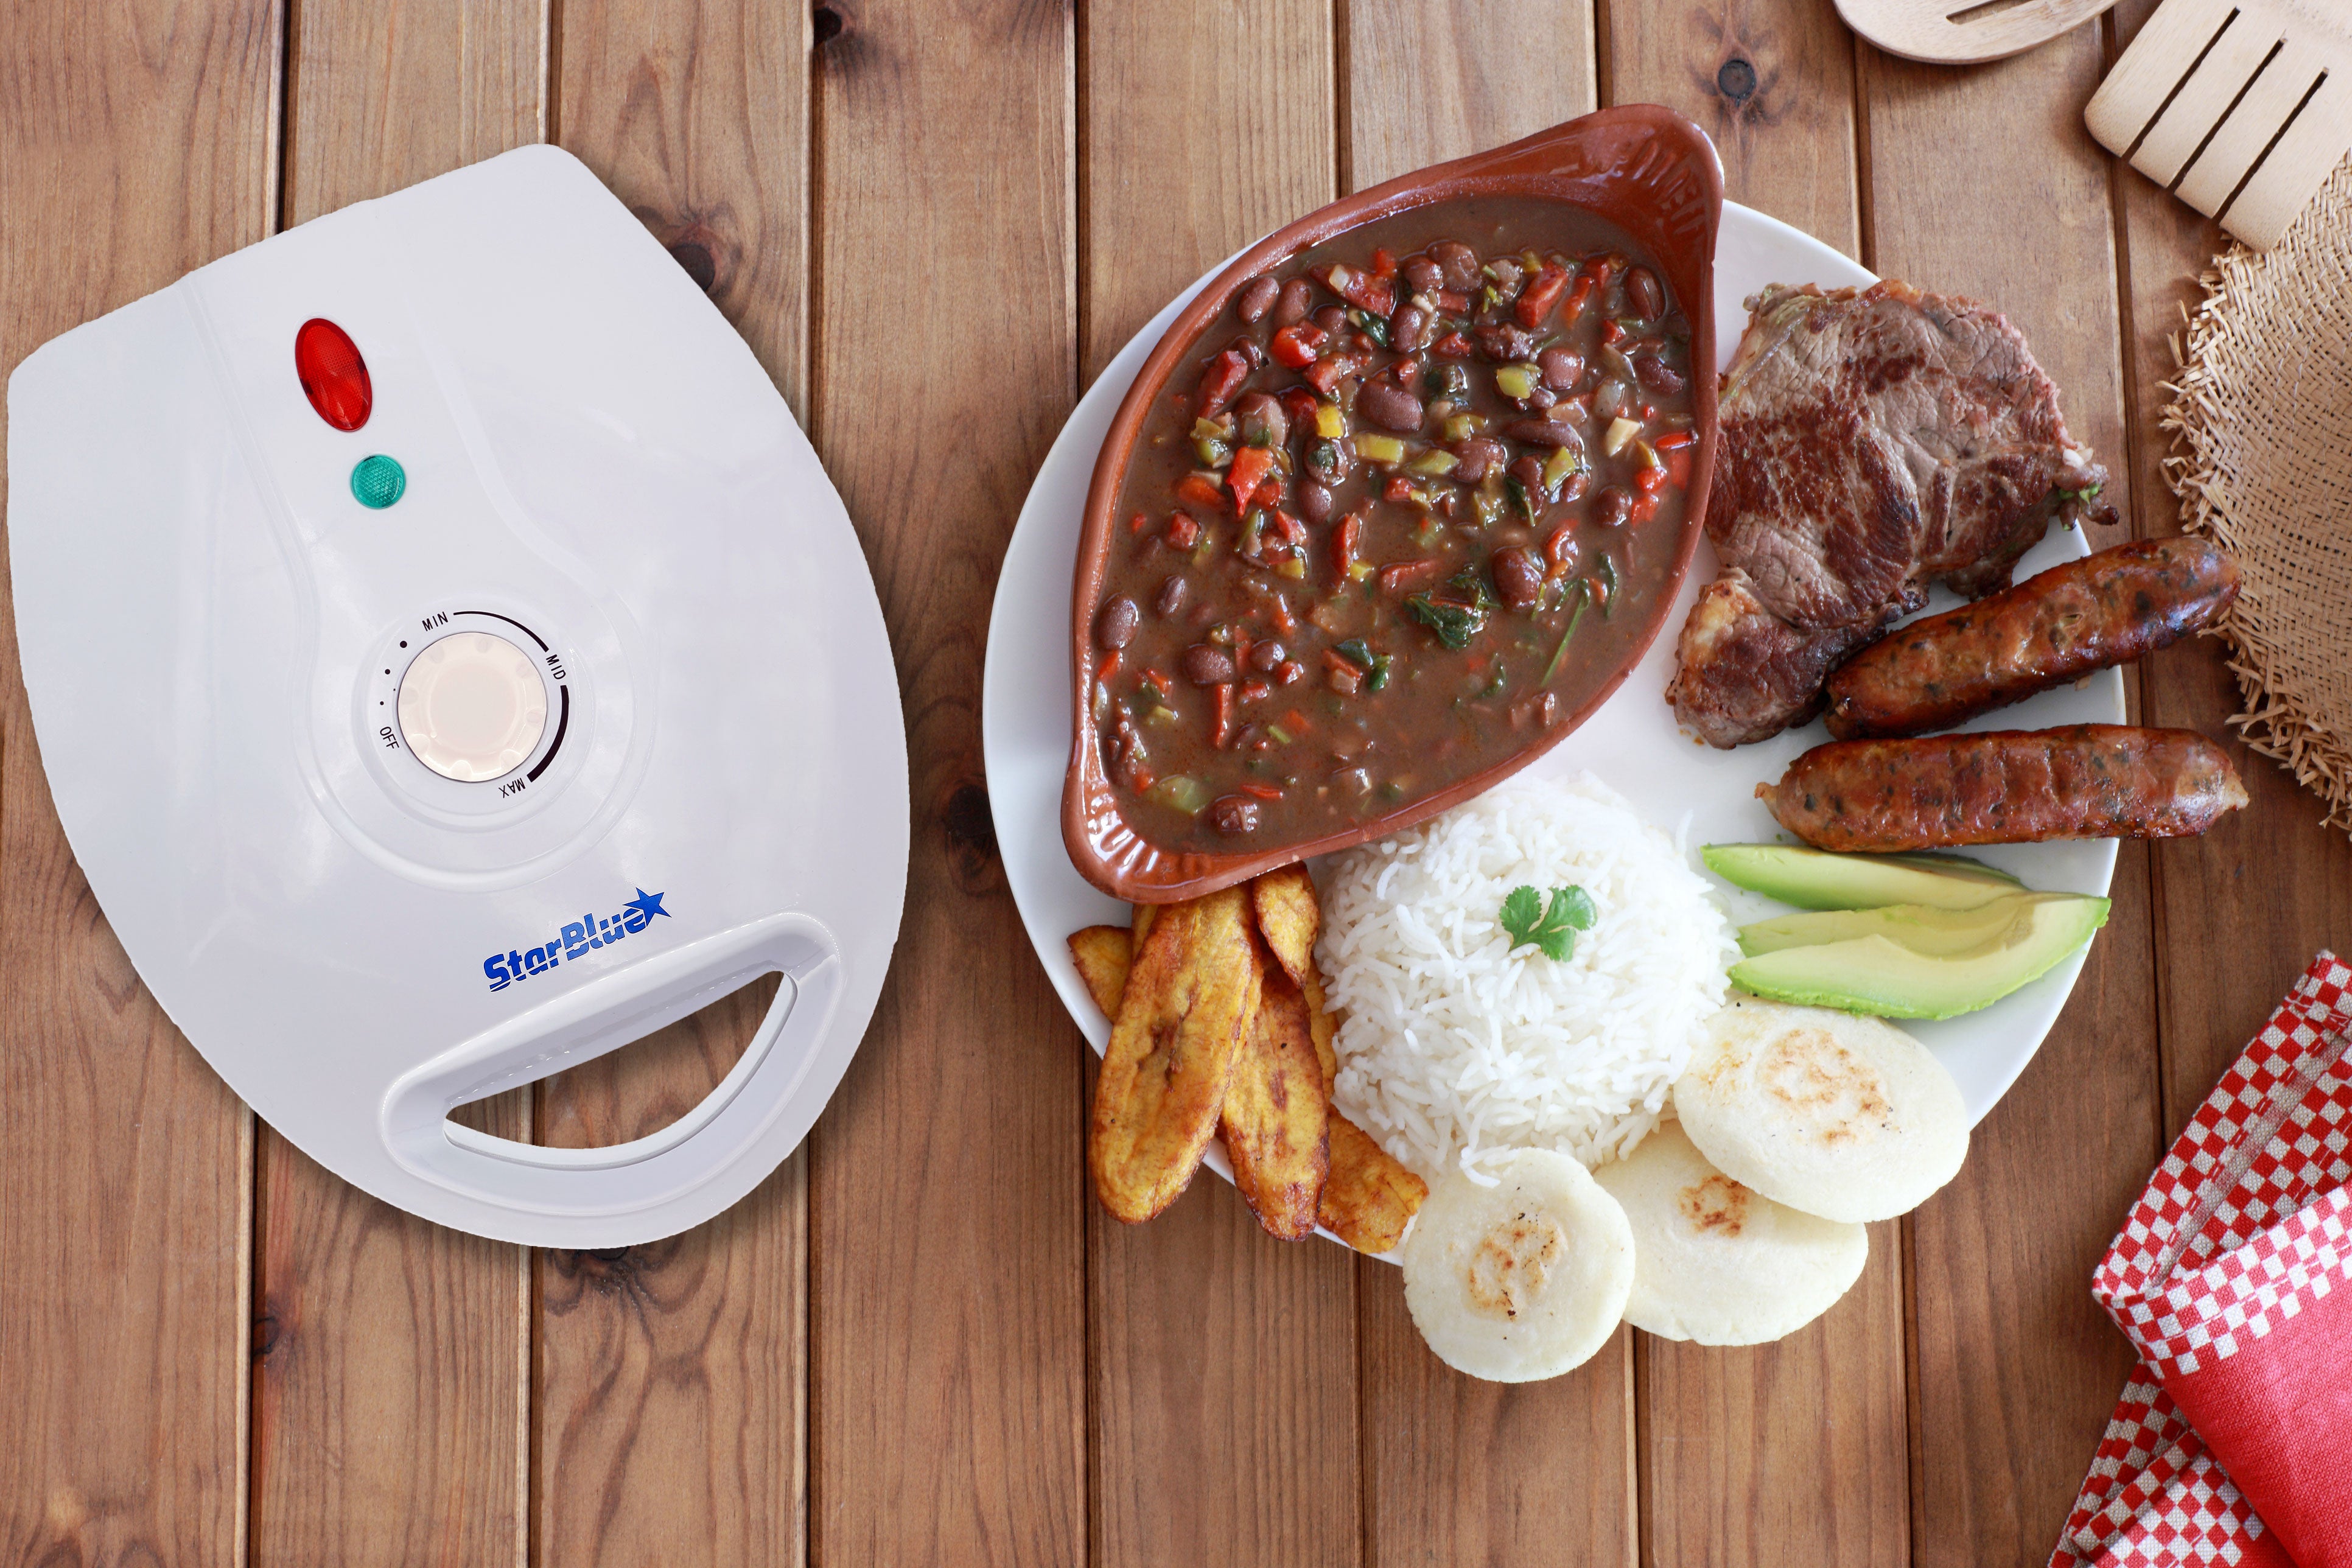 Arepa Maker by StarBlue with Free Recipes eBook - Quick and Electric Arepa Maker